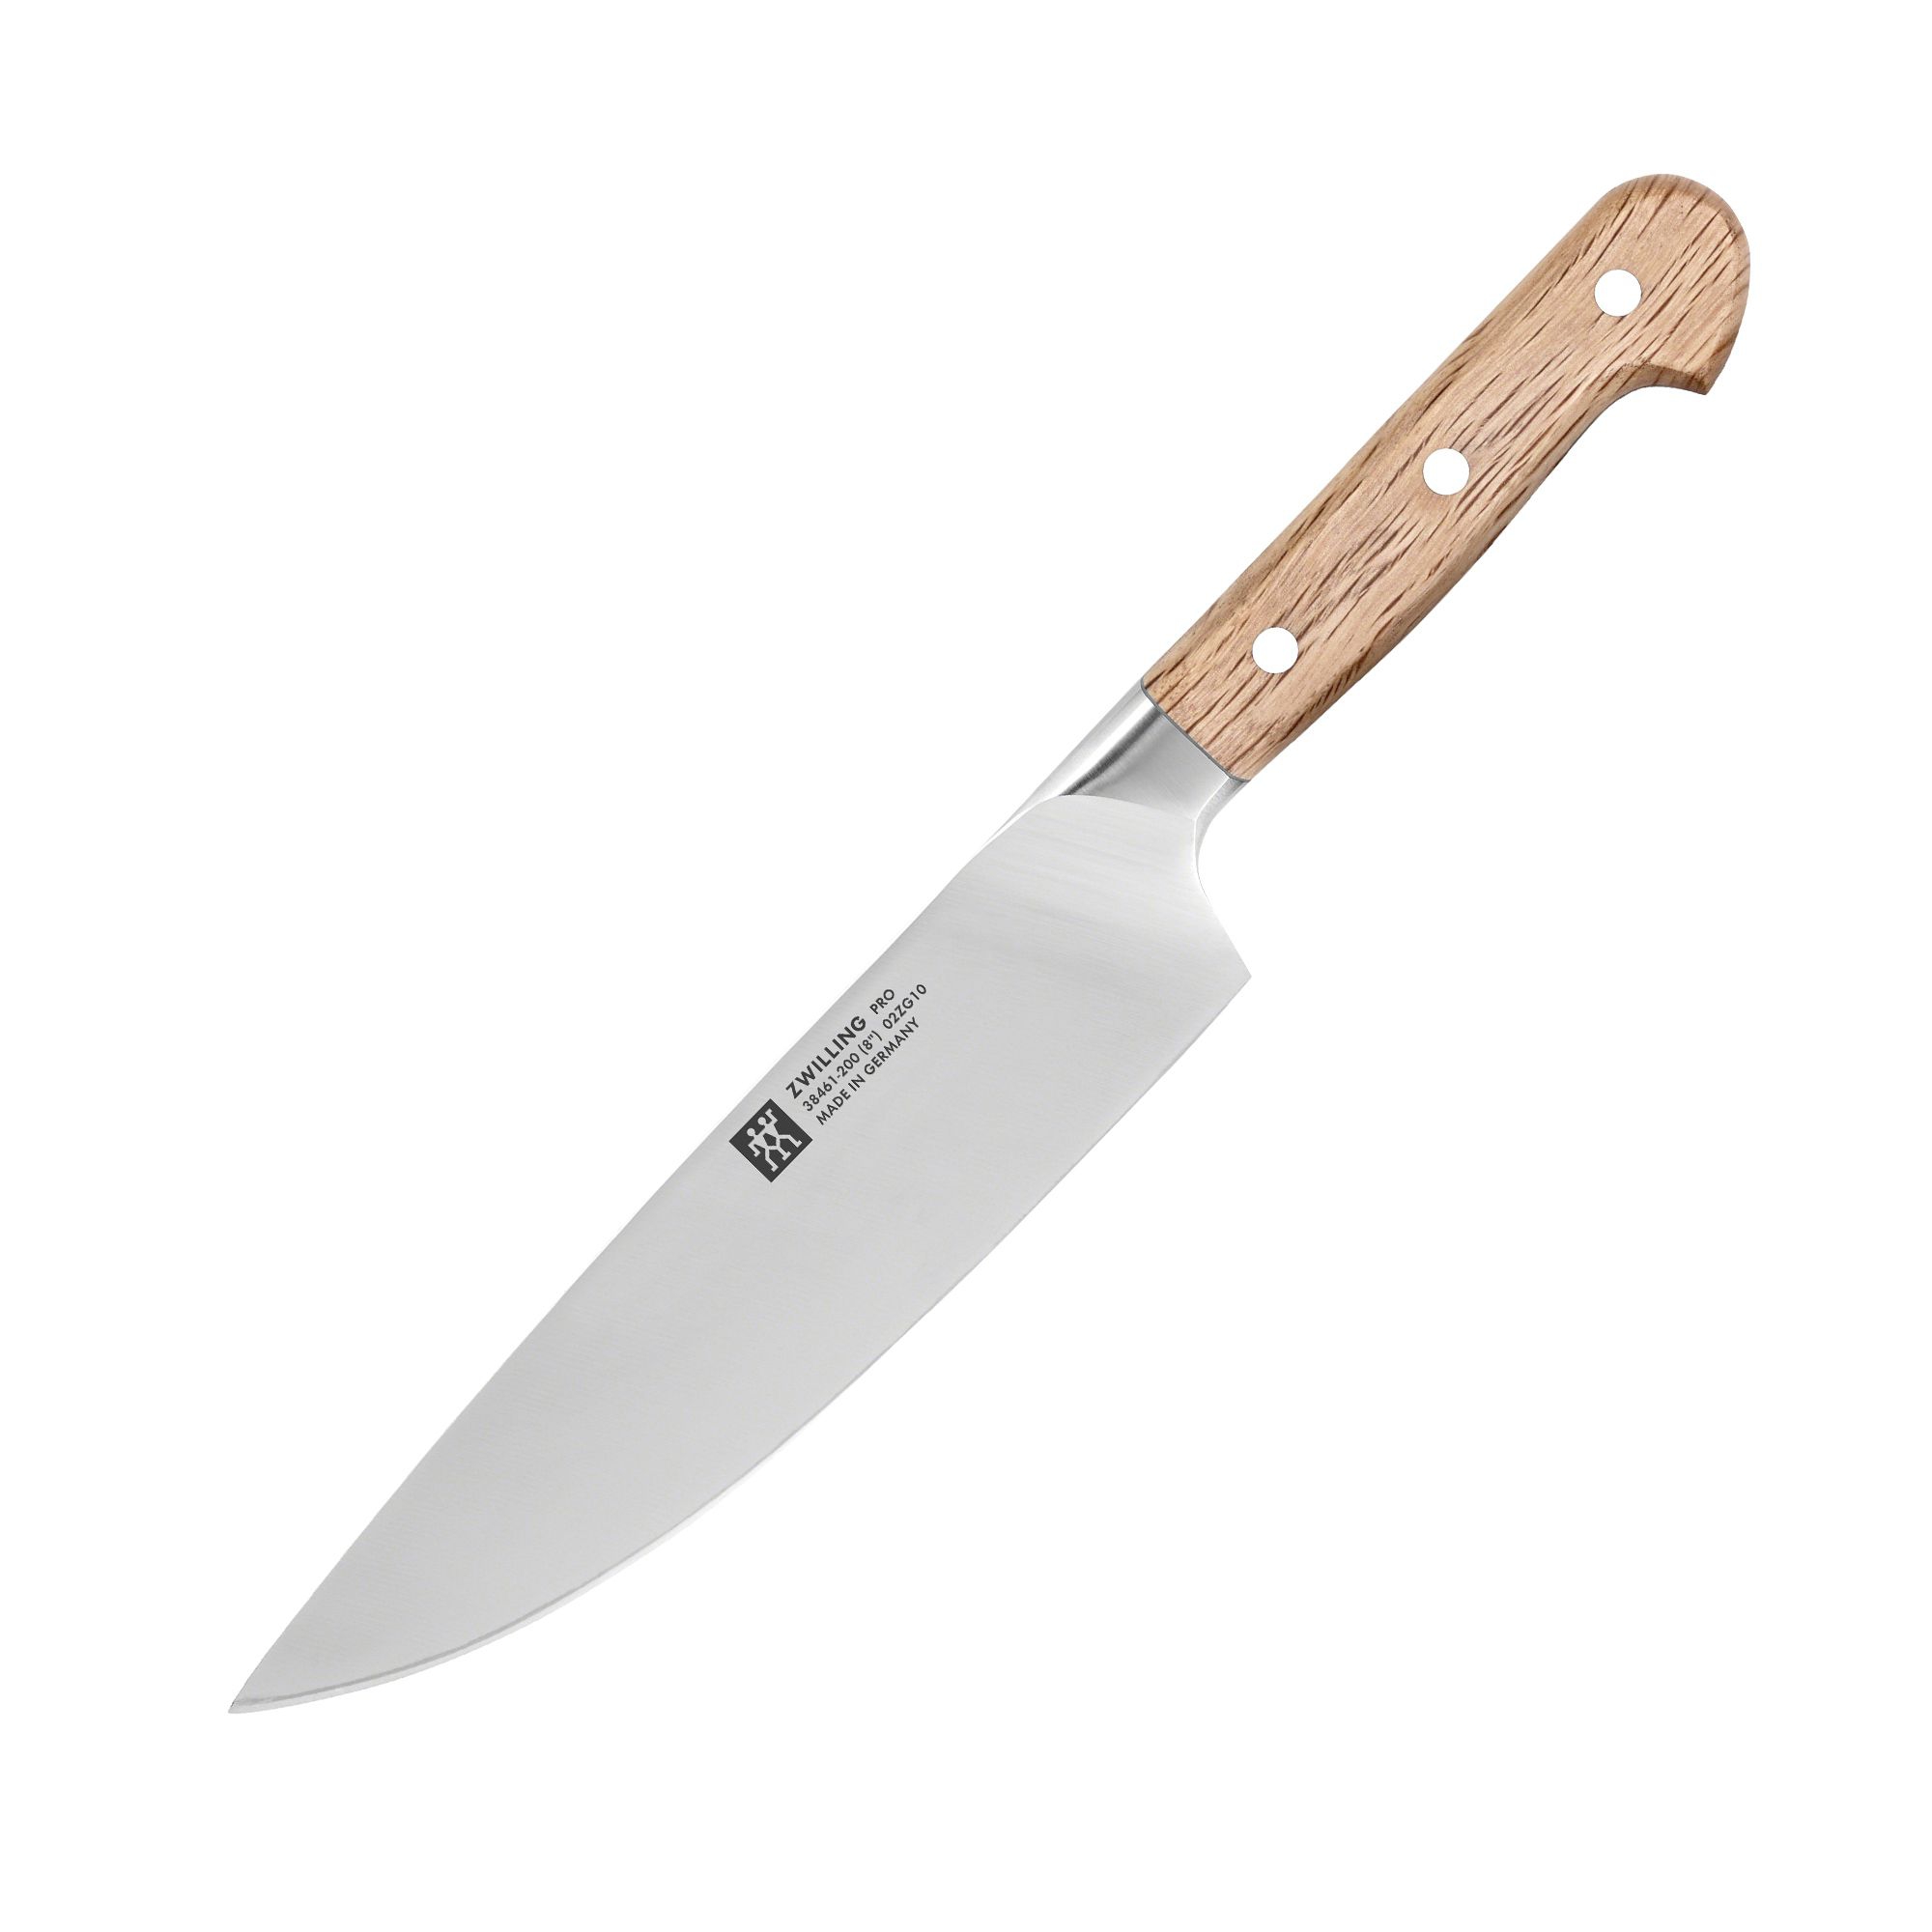 Zwilling - Pro Wood - Chef's knife - 20cm